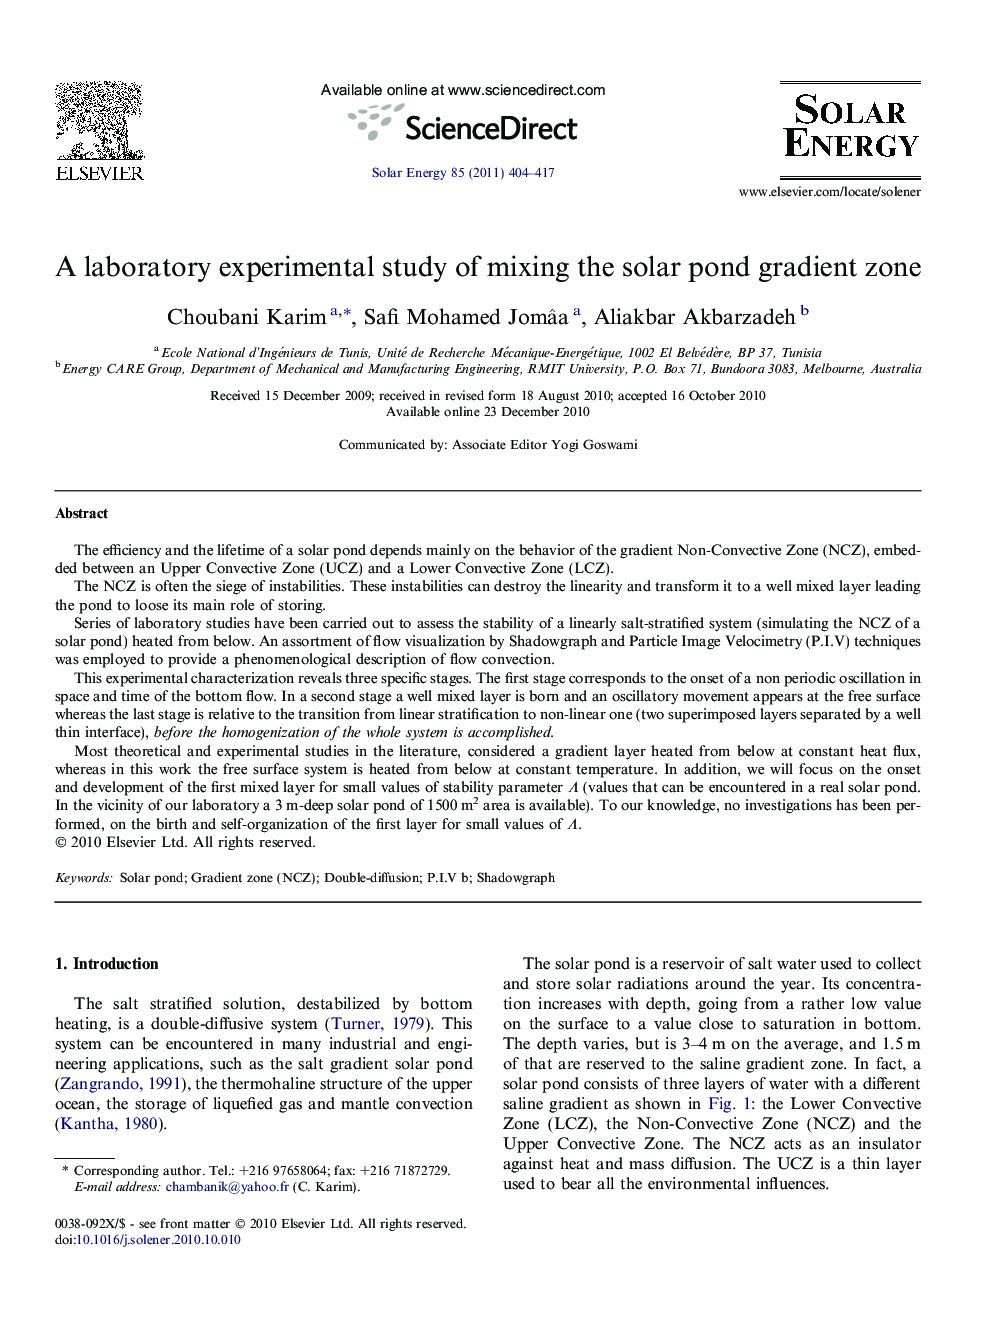 A laboratory experimental study of mixing the solar pond gradient zone